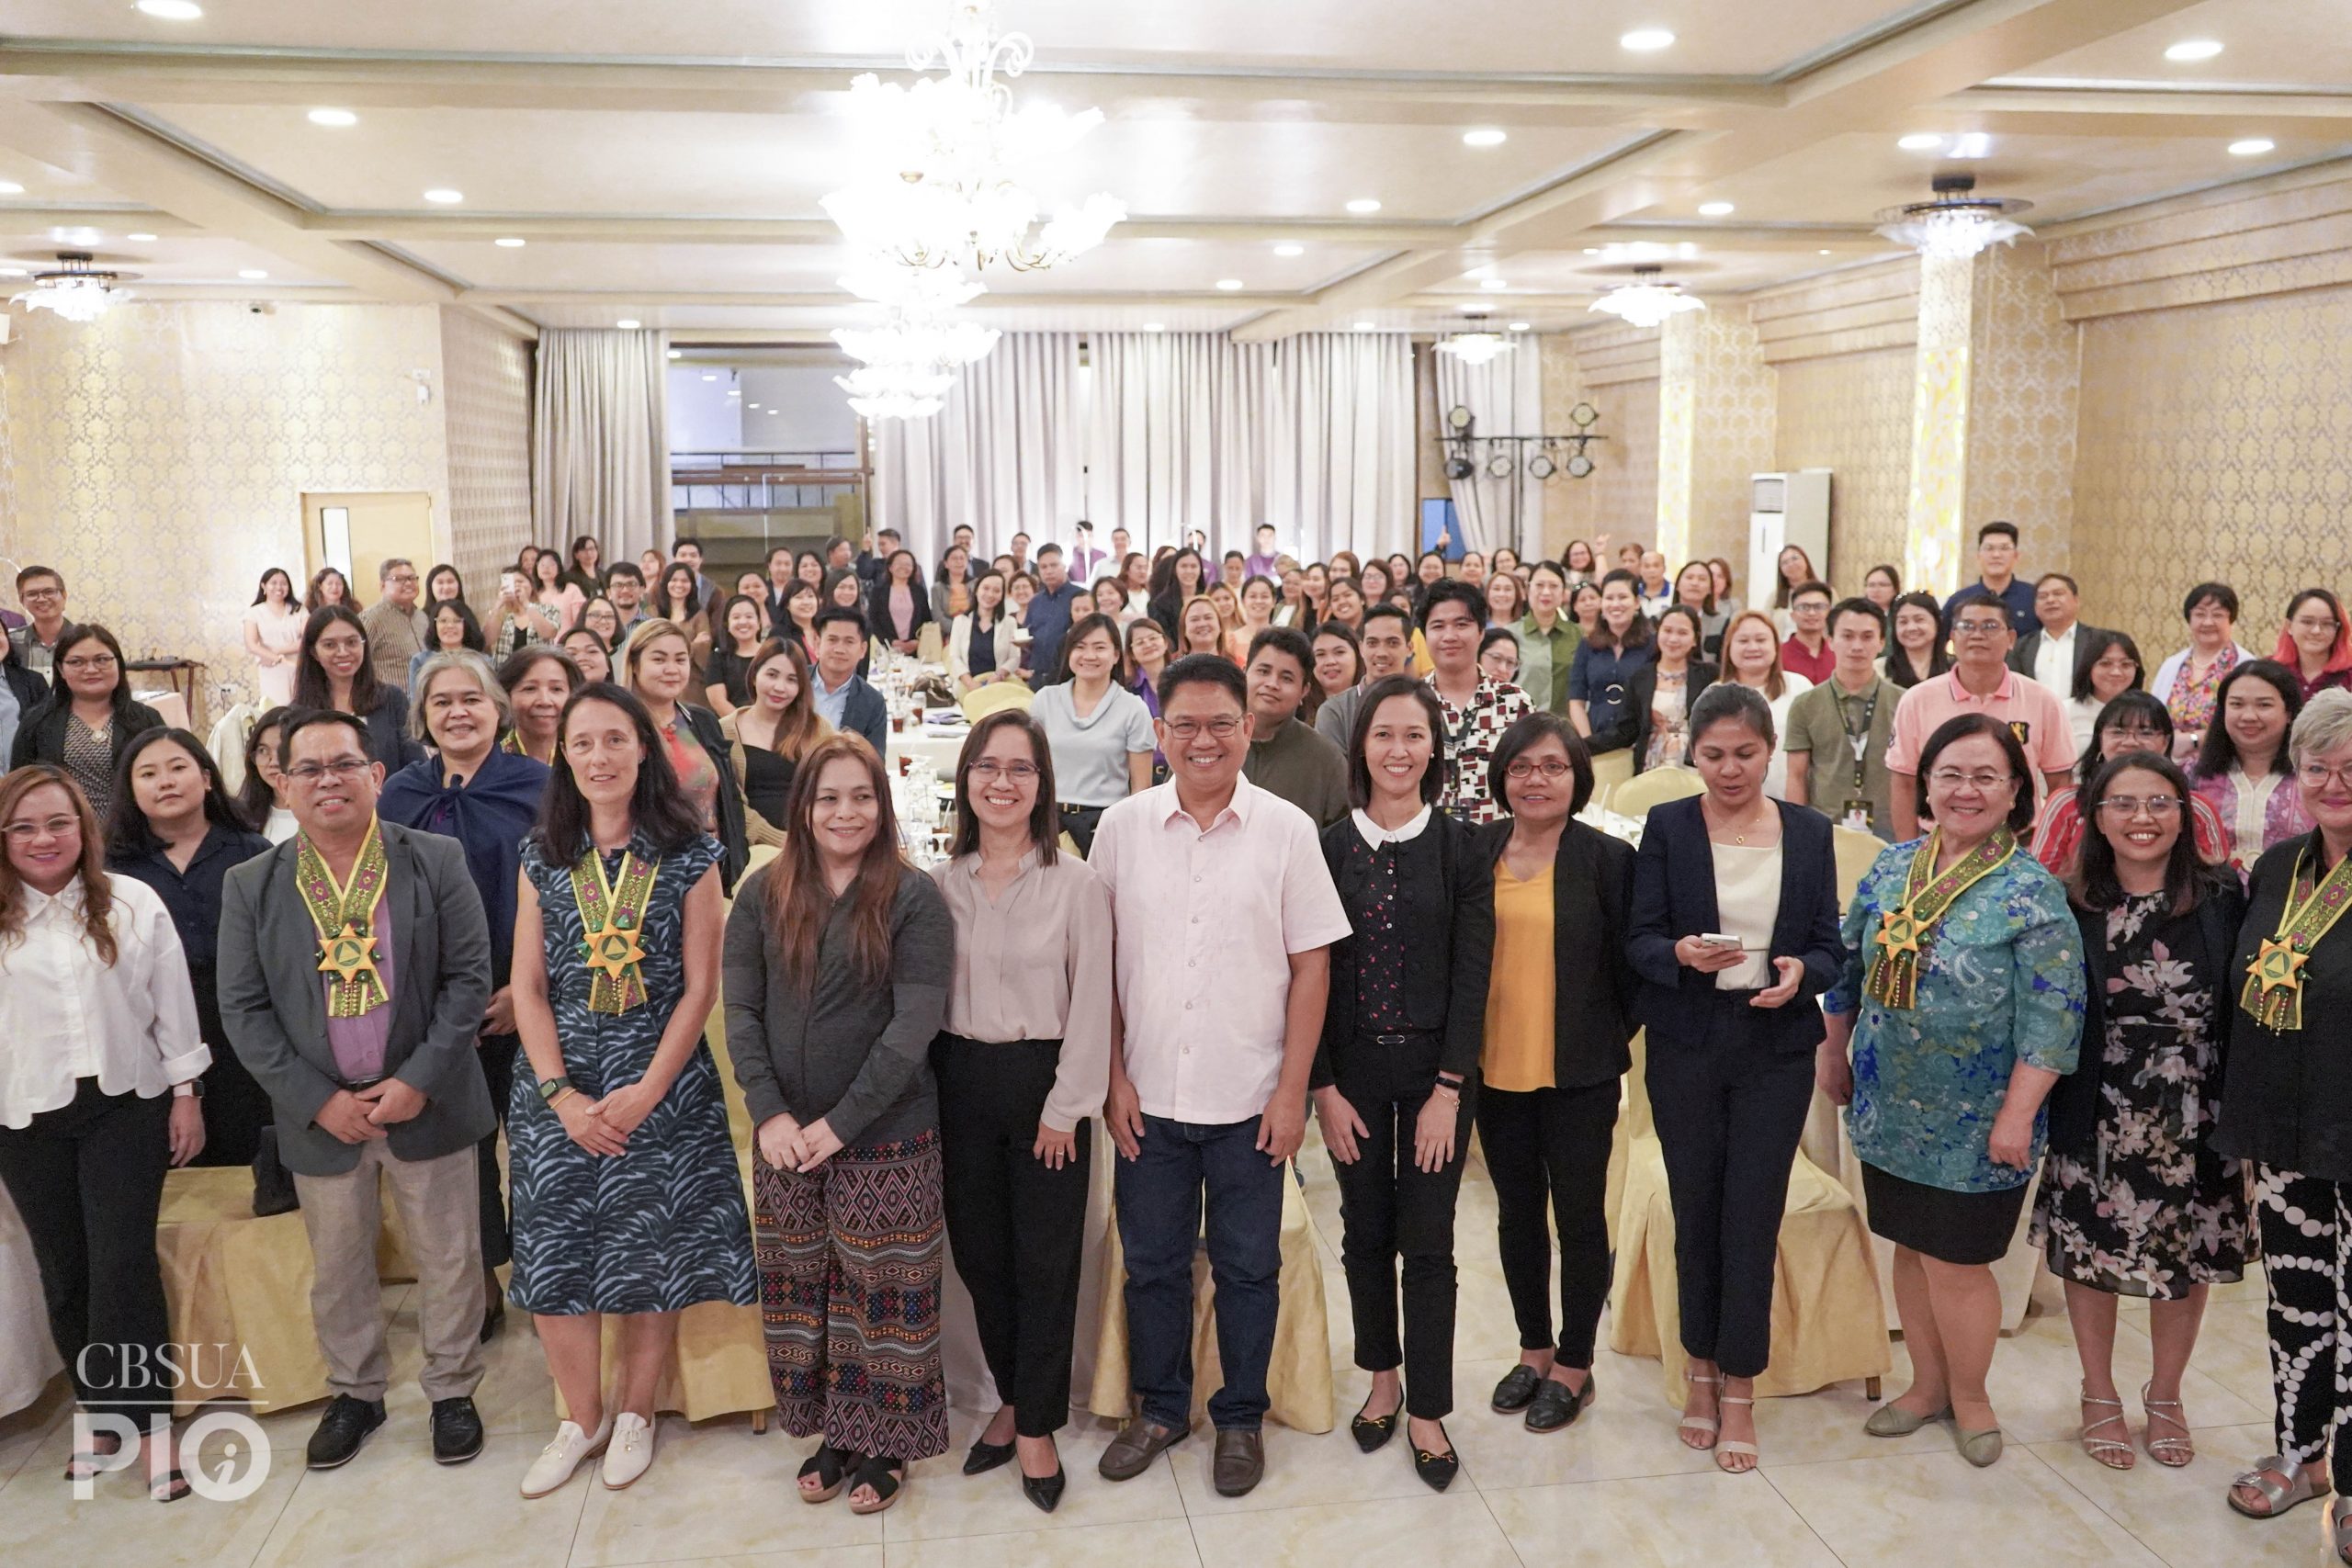 CELEBRATING WOMEN IN AGRICULTURE: CBSUA HOSTS 2ND INT’L CONFERENCE ON WELA